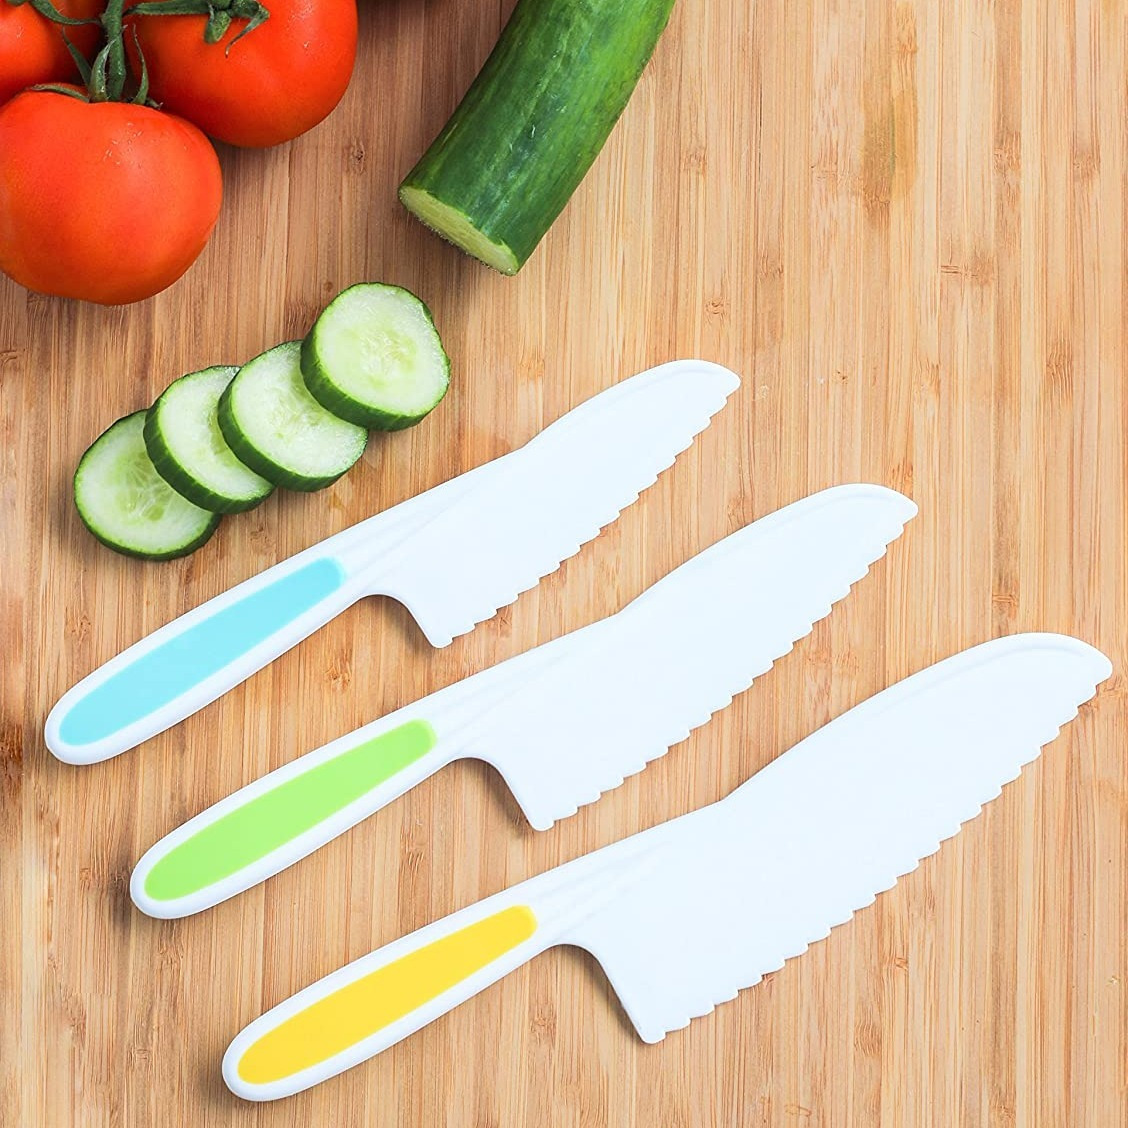 Plastic Kitchen Knife, 3 Different Sizes of Plastic Knife Kitchen, Kids  Knives Set for Cutting Fruits, Vegetables, Bread, Salads, Cakes (3 Pieces)